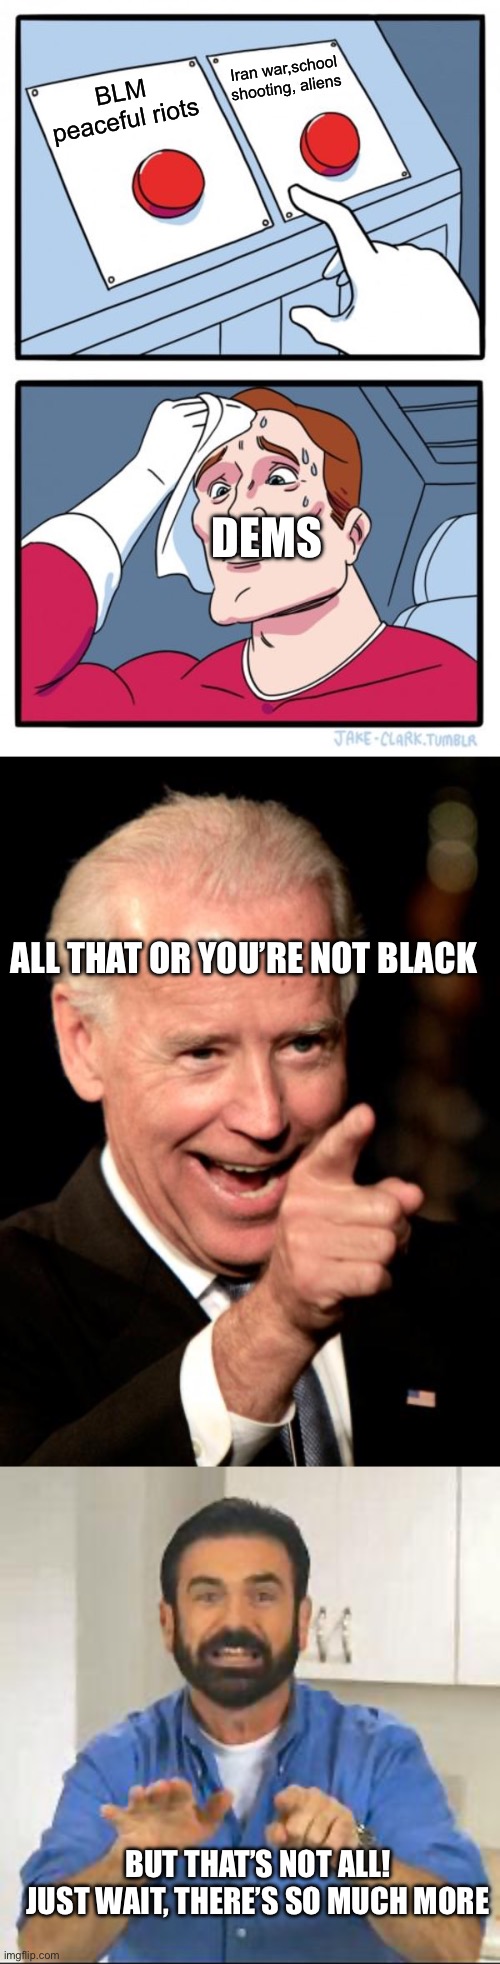 BLM peaceful riots Iran war,school shooting, aliens DEMS ALL THAT OR YOU’RE NOT BLACK BUT THAT’S NOT ALL! 
JUST WAIT, THERE’S SO MUCH MORE | image tagged in memes,two buttons,smilin biden,but wait there's more | made w/ Imgflip meme maker